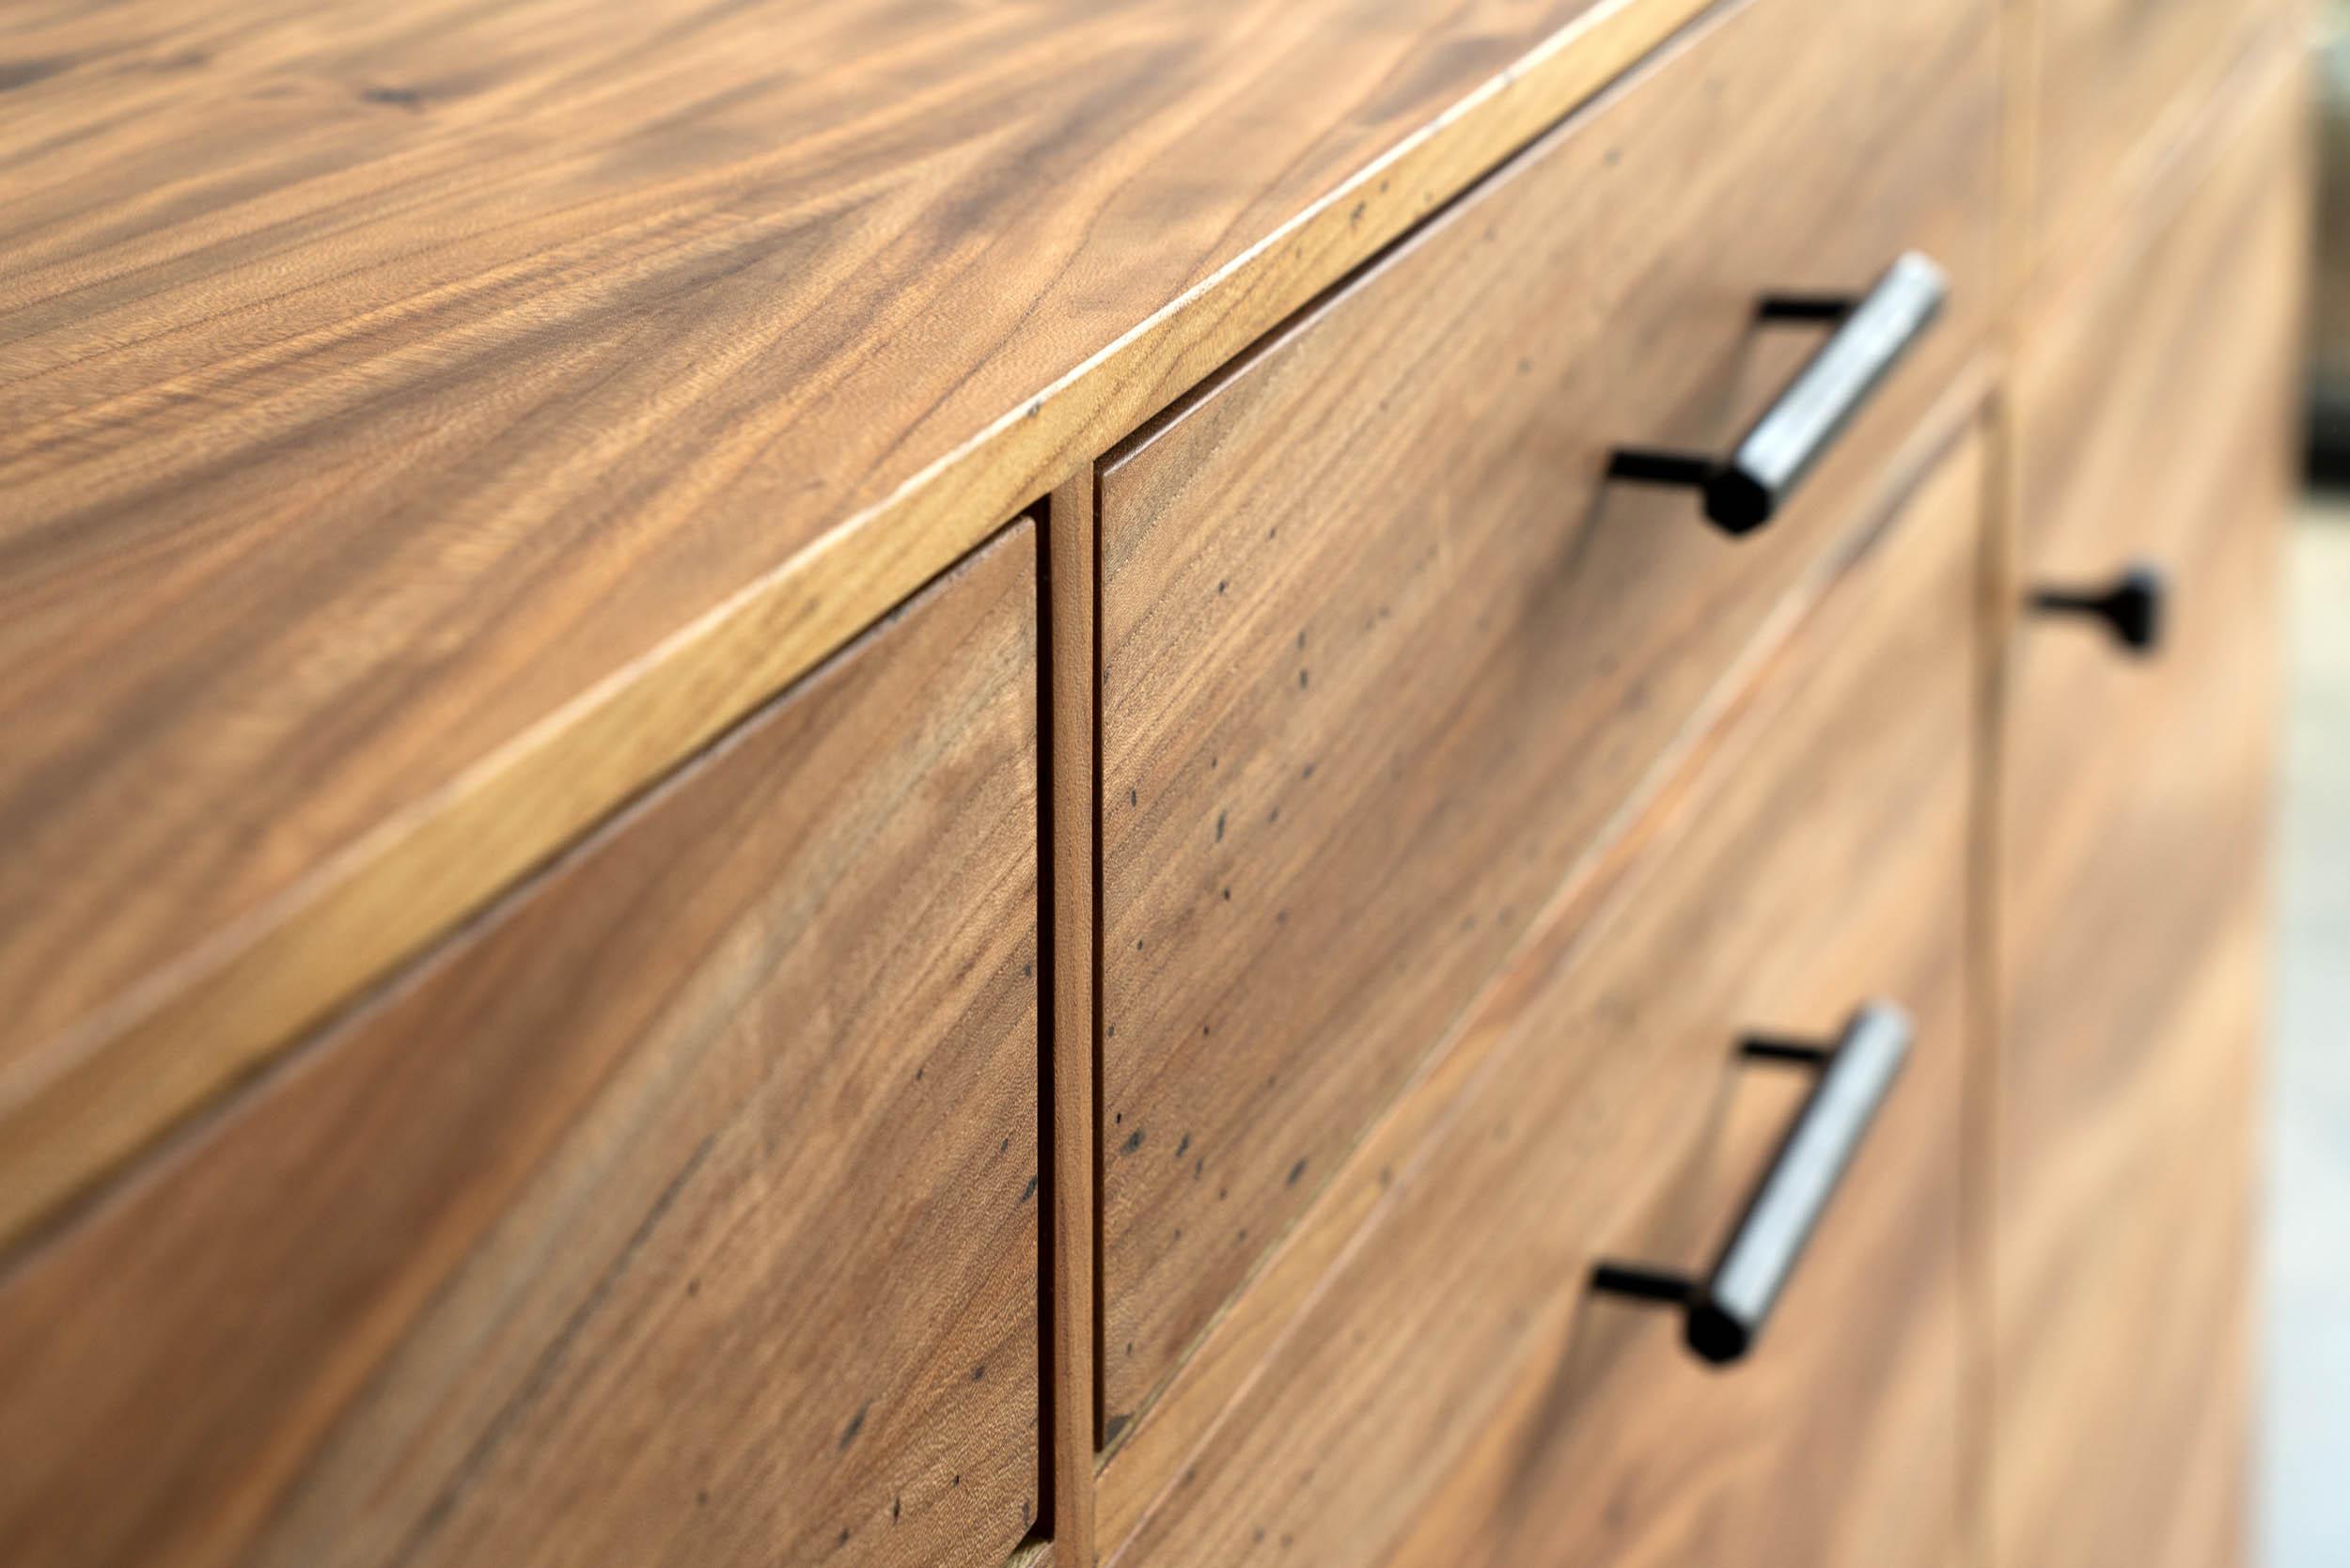 The Lanett credenza is handcrafted and unique in every way. The elegance of this modern style credenza strikes from the first moment with intricate veneer work showcasing the enigmatic grain patterns of urban timber. Unique species like elm ensure